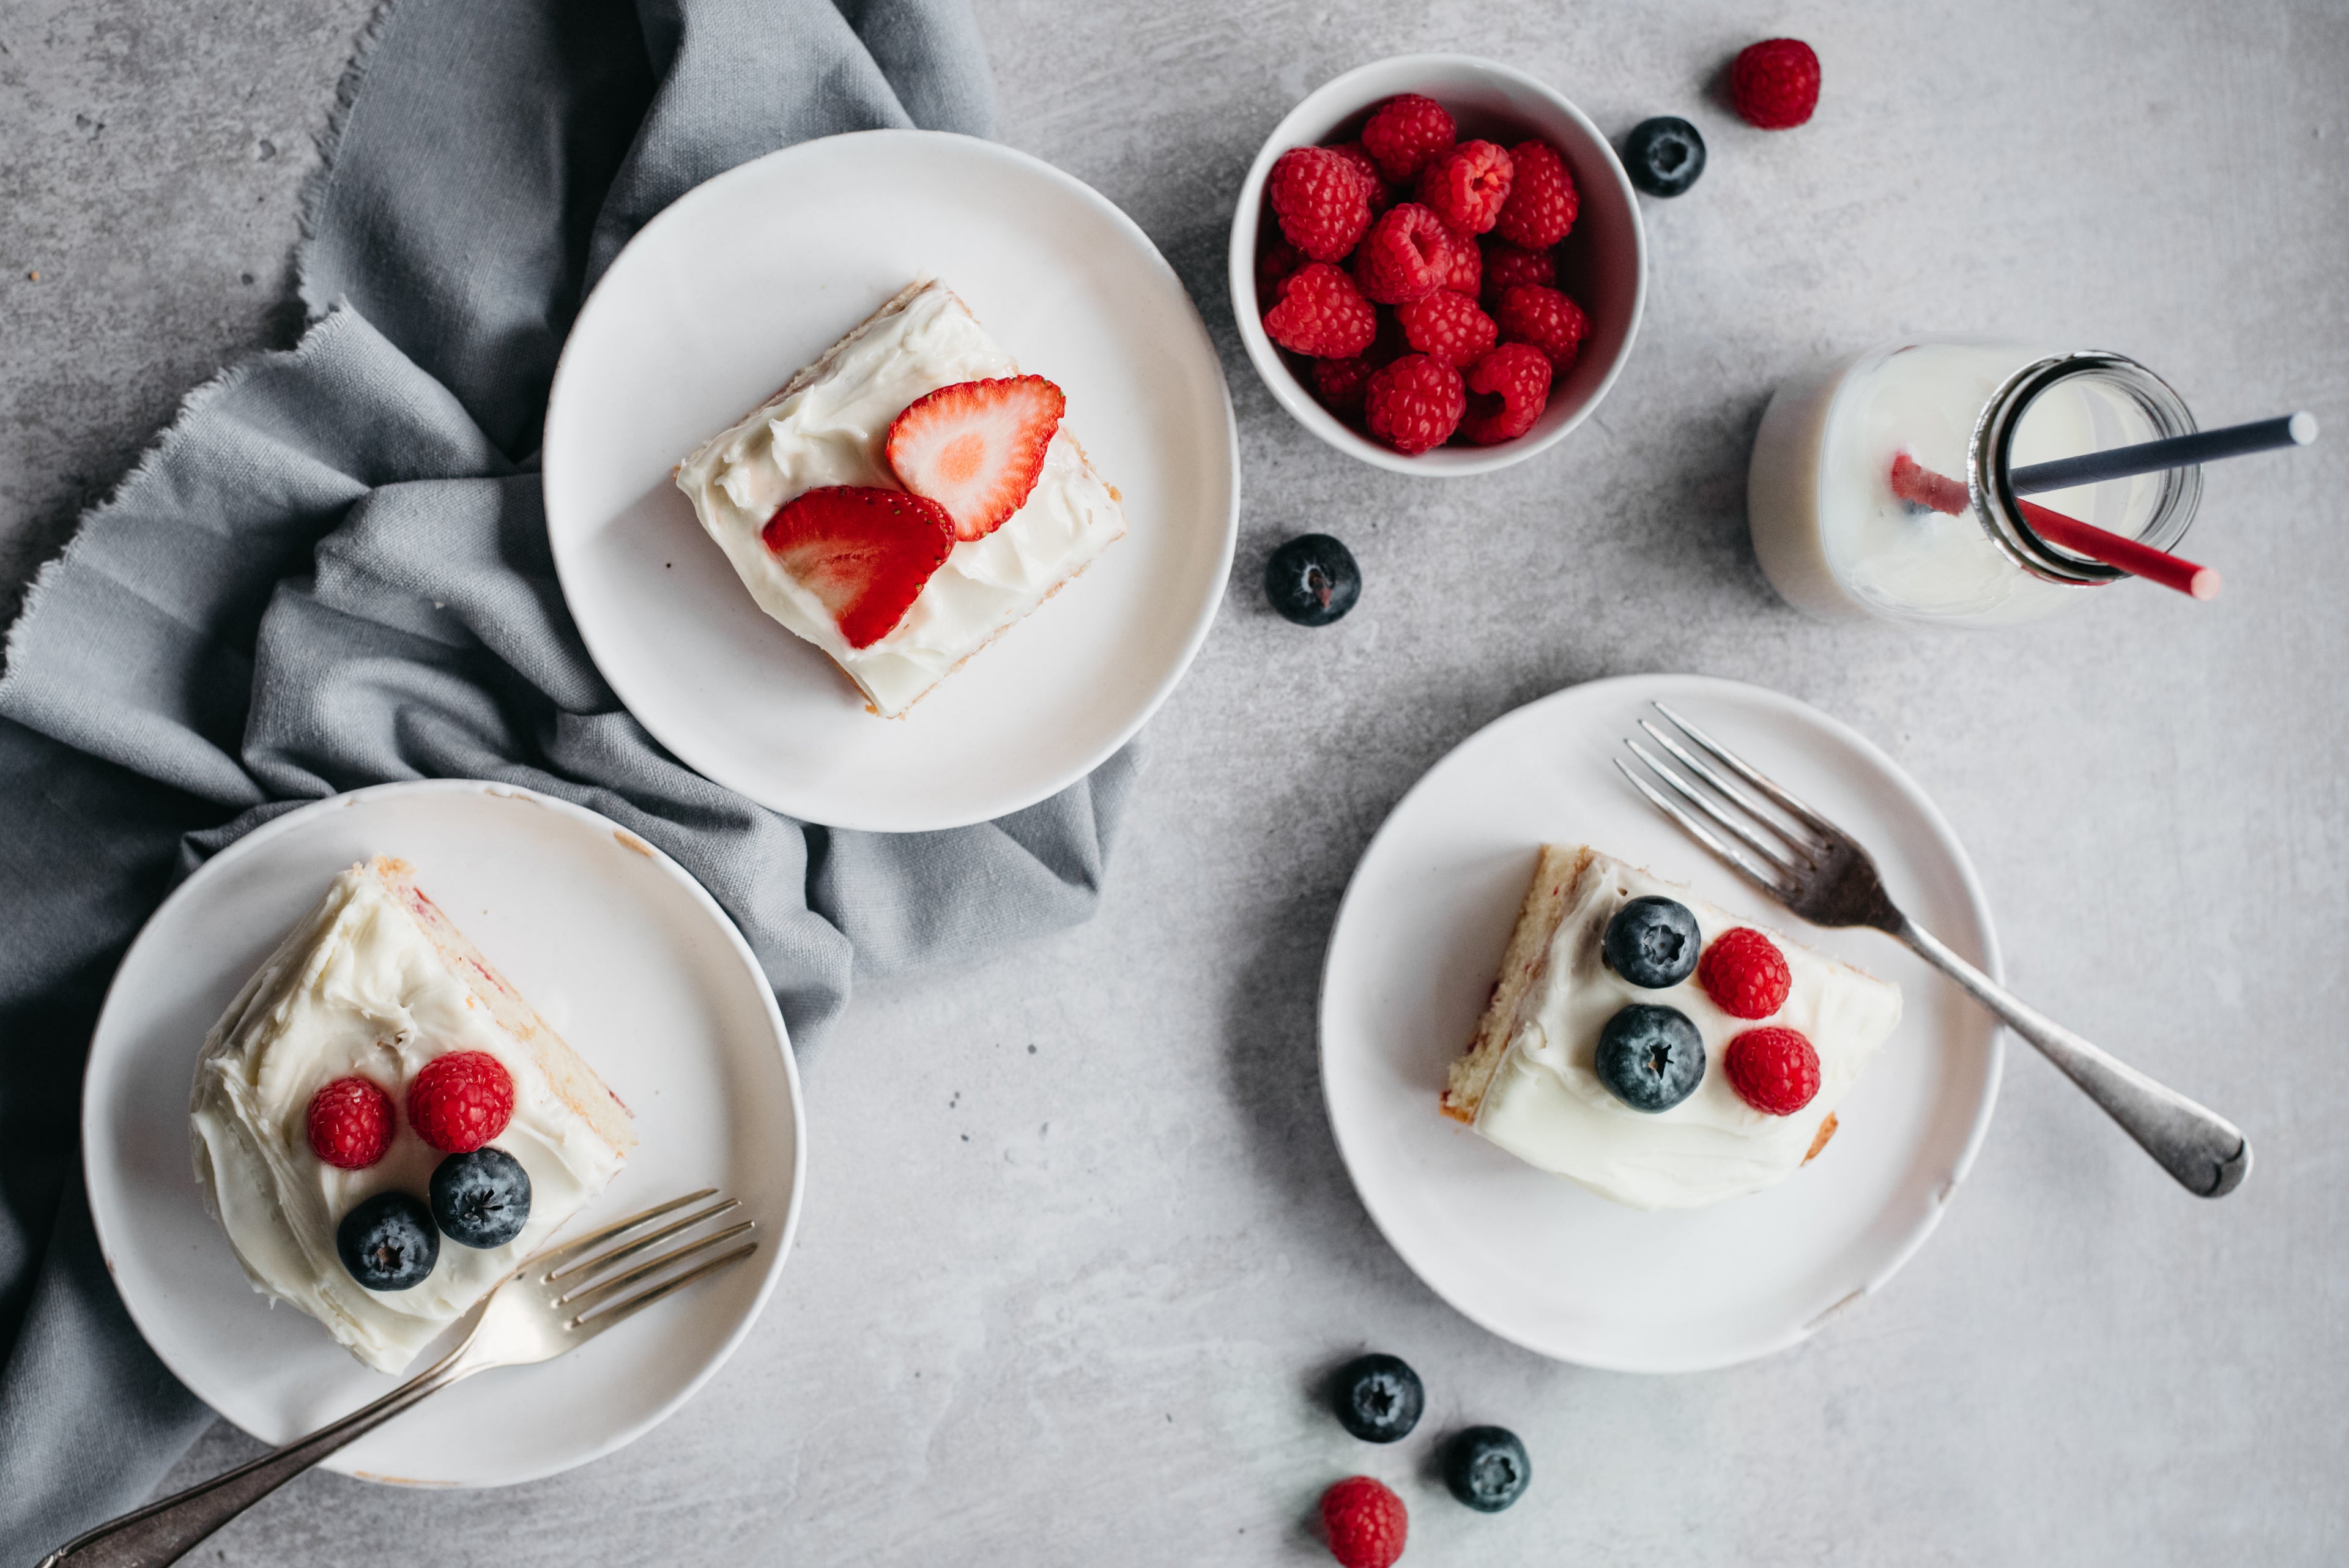 Union Jack Traybake sliced into portions served on plates next to forks, with the cake topped with fresh seasonal berries perfect for a summer Jubilee party